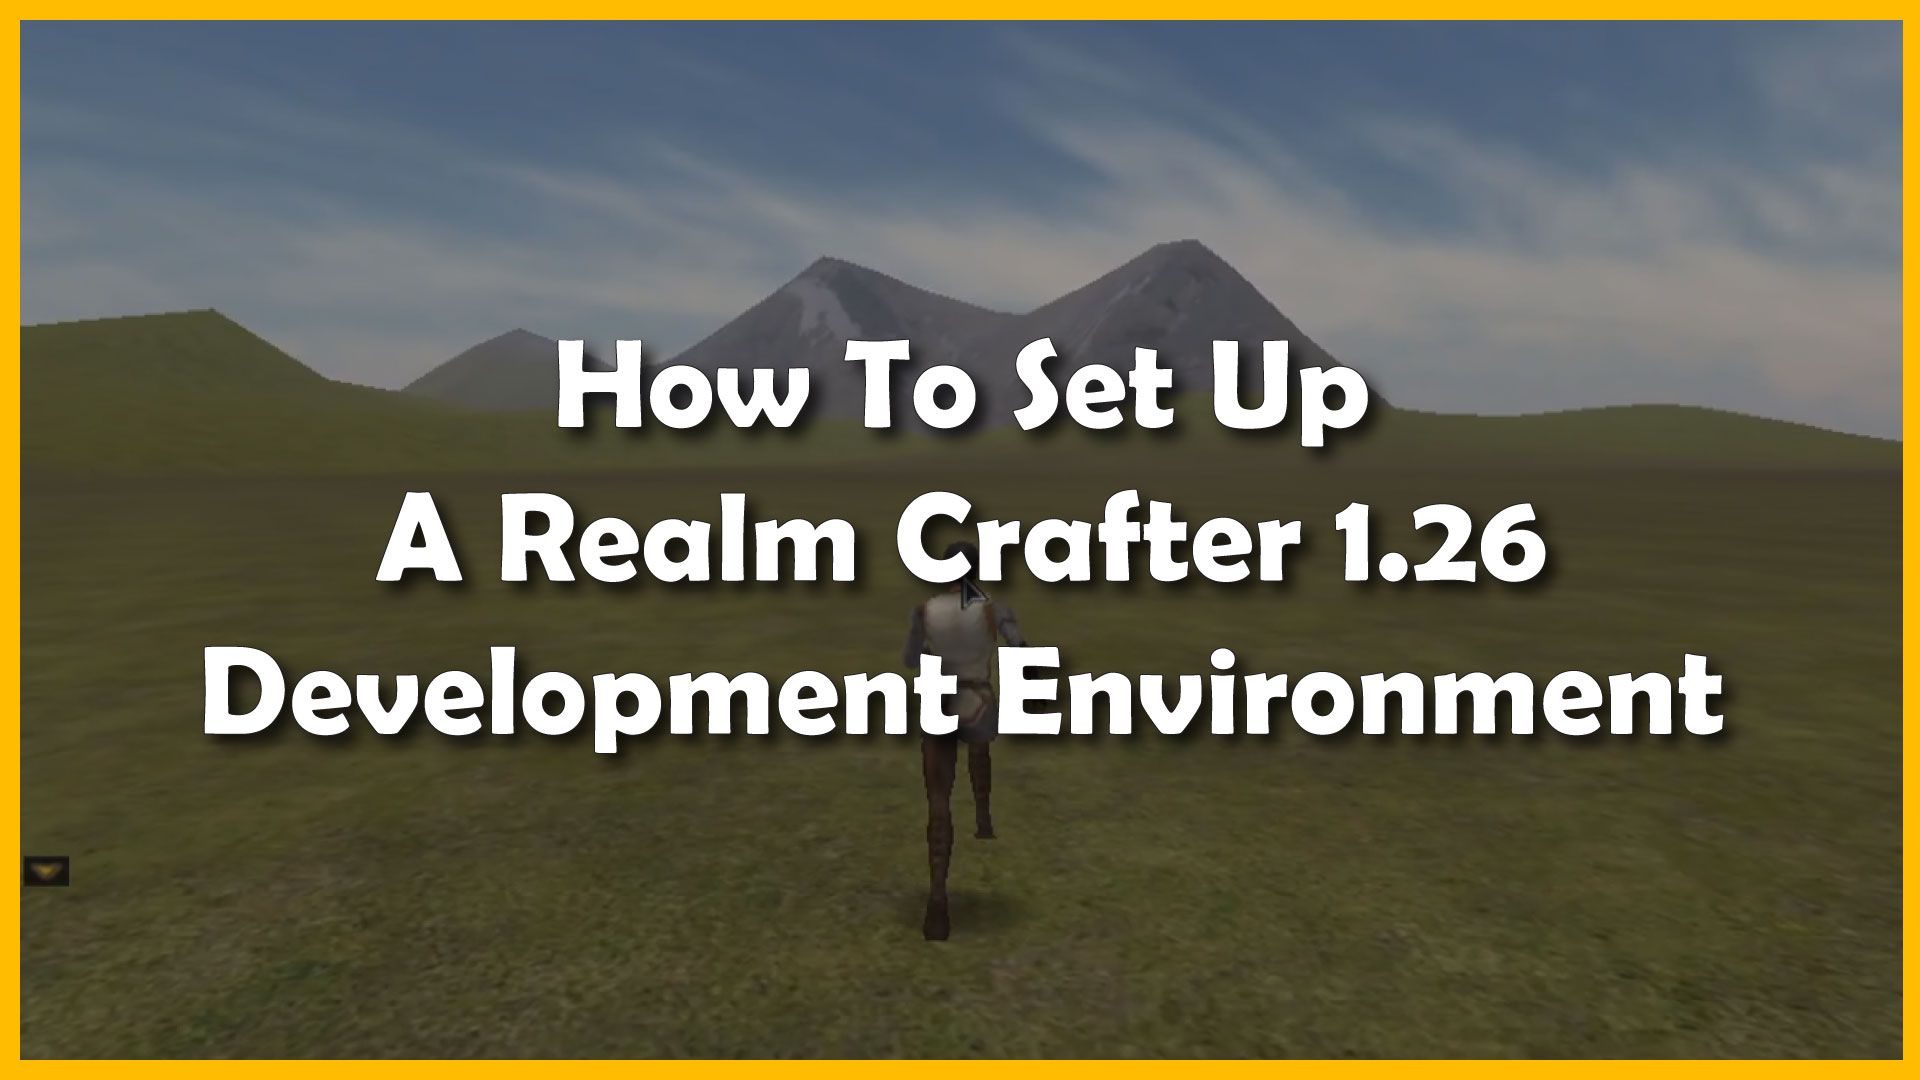 How To Set Up A Realm Crafter 1.26 Development Environment title image